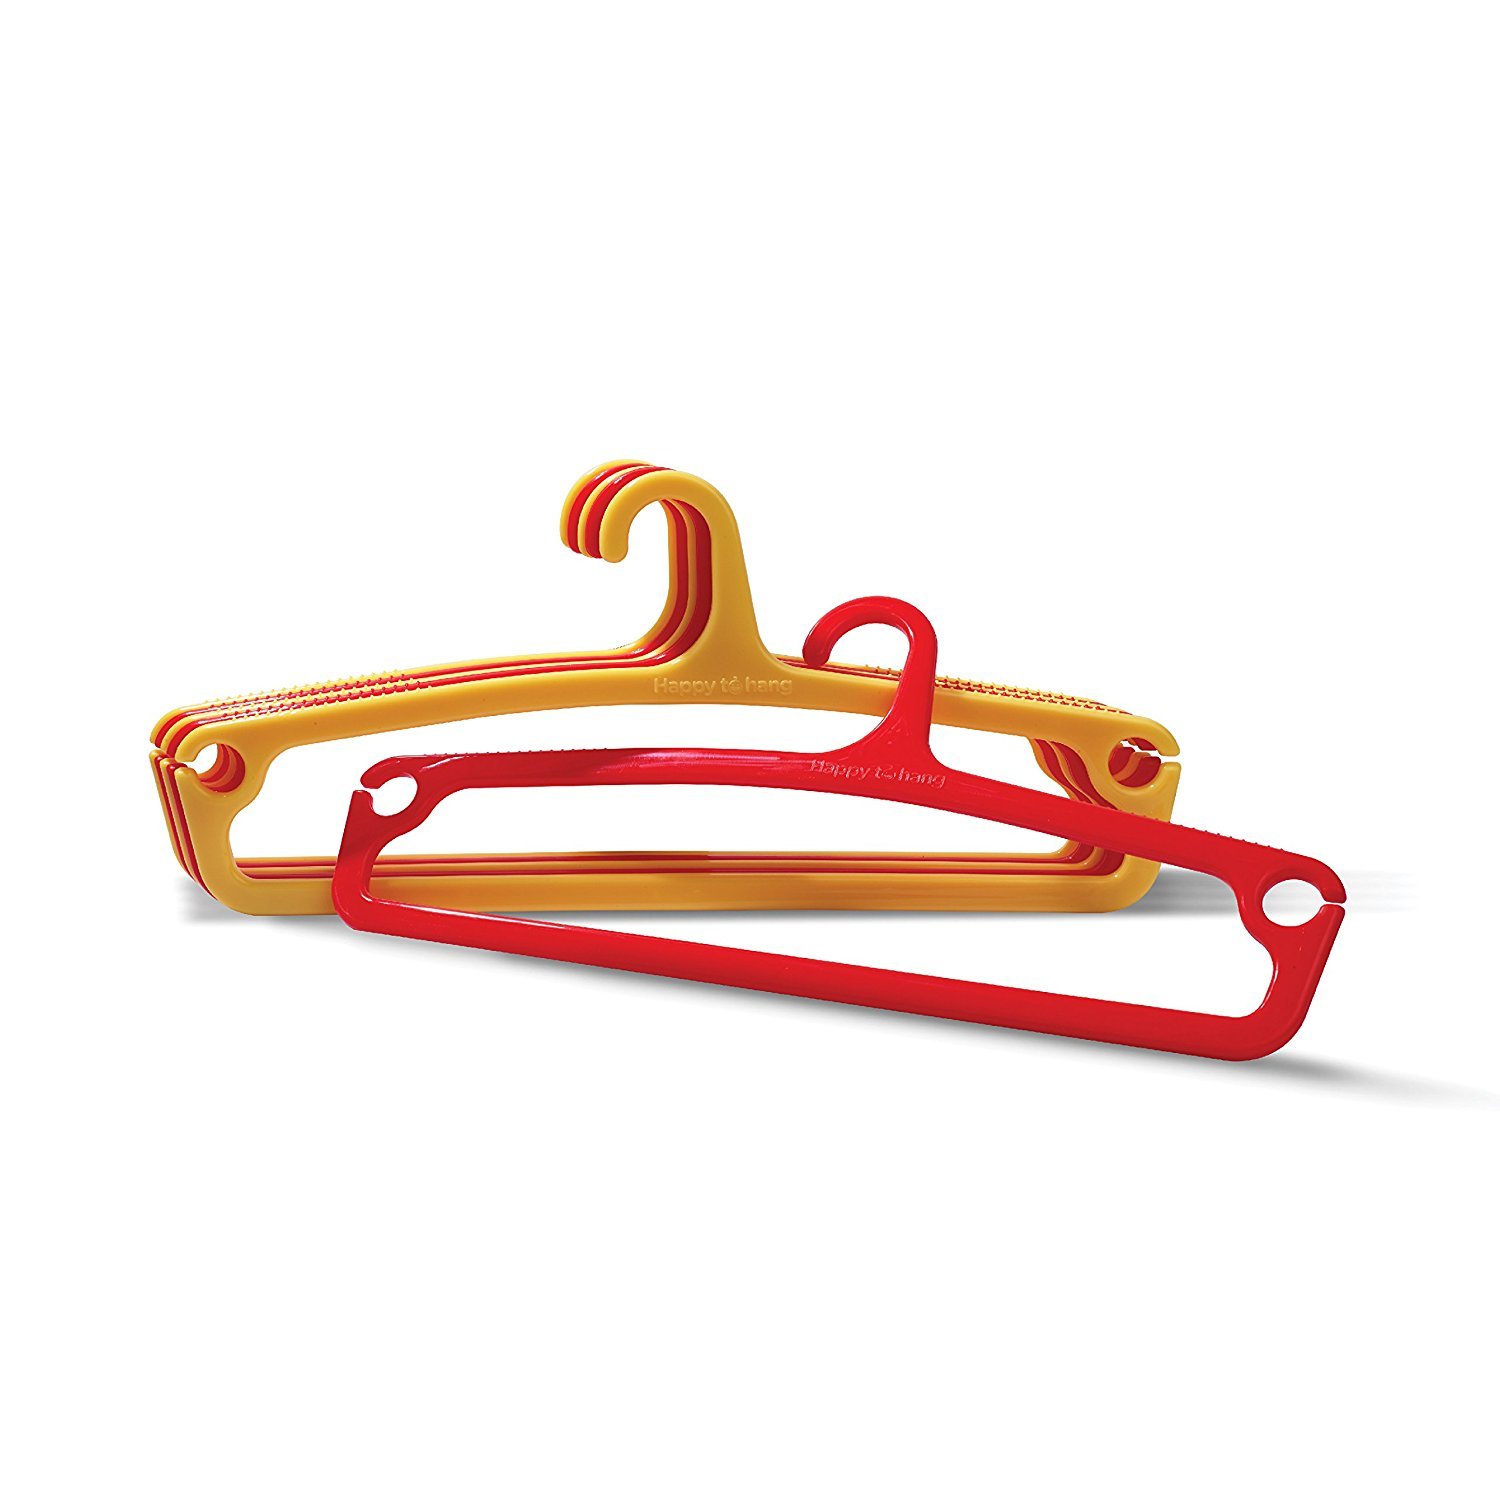 Happy-To-Hang-Ethnica-Polypropylene-Hanger-(Yellow-and-Red)